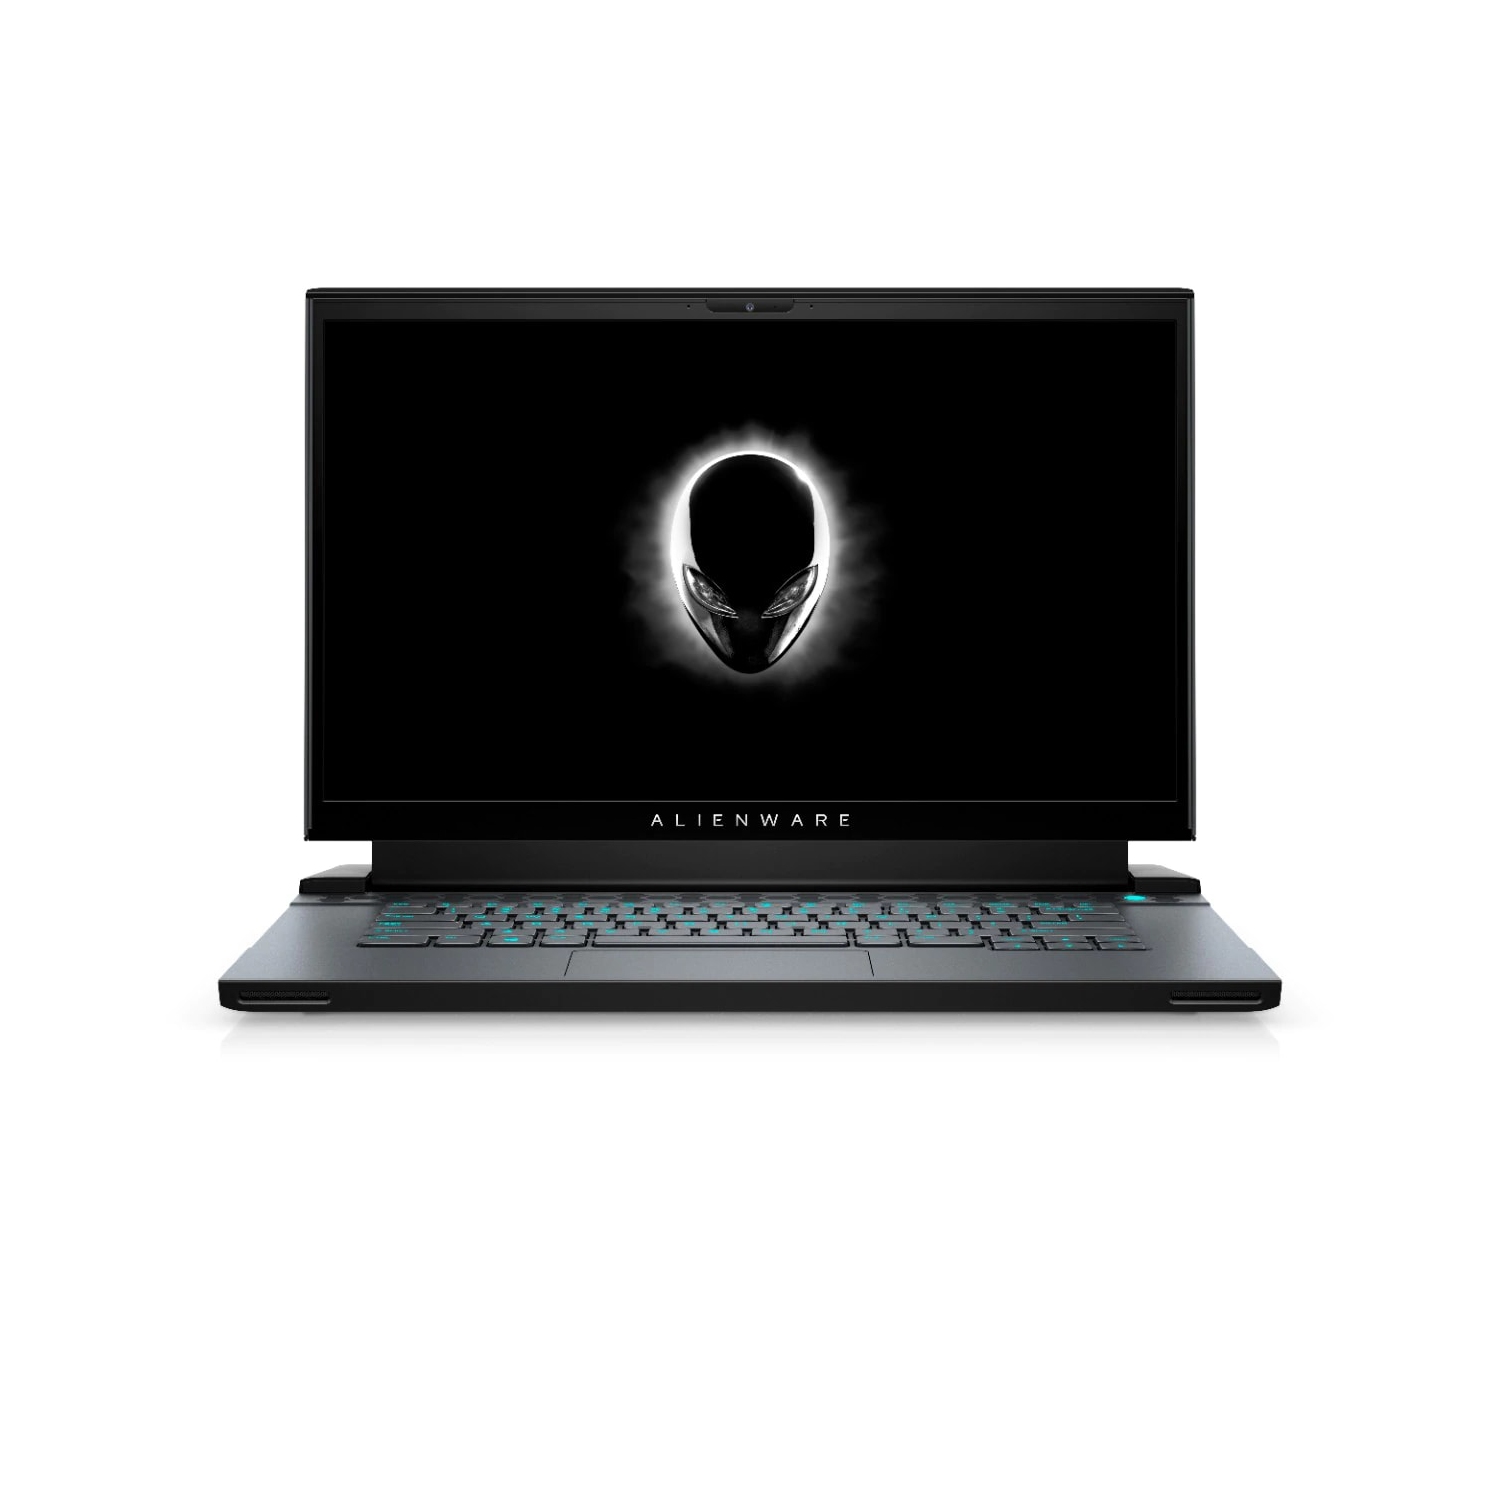 Refurbished (Excellent) - Dell Alienware m15 R4 Gaming Laptop (2021), 15.6" FHD, Core i7, 512GB SSD, 32GB RAM, RTX 3070, 8 Cores @ 5 GHz, 10th Gen CPU Certified